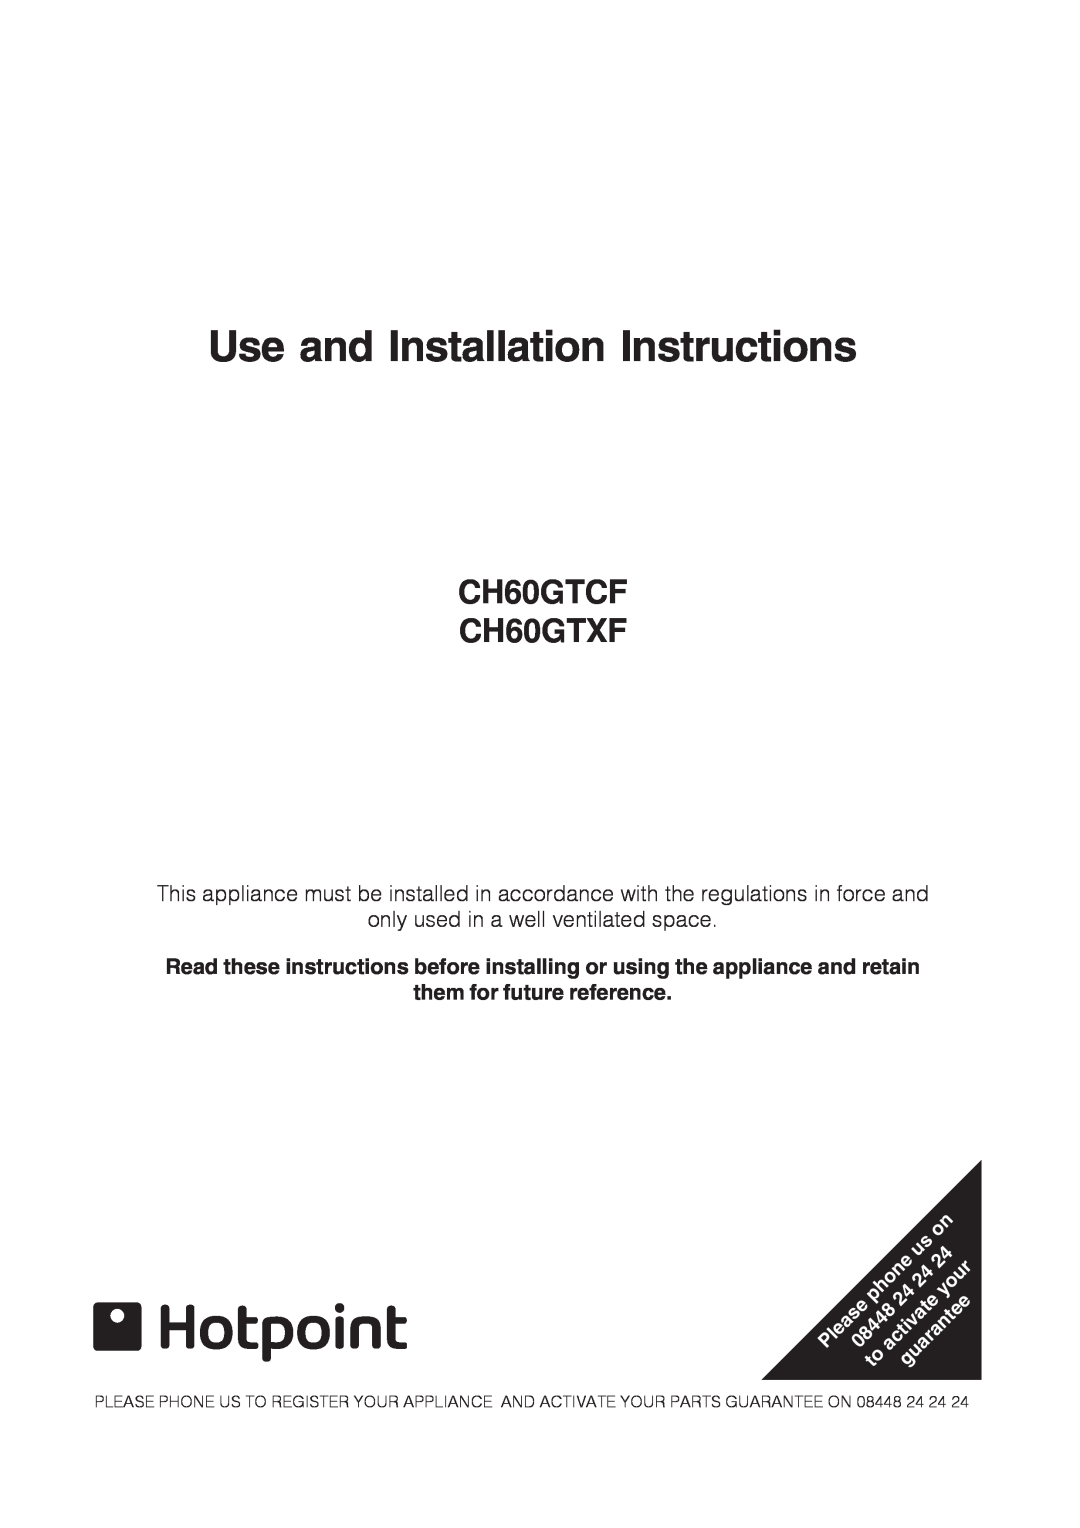 Hotpoint CH60GTXF installation instructions Use and Installation Instructions, them for future reference, phone, your 